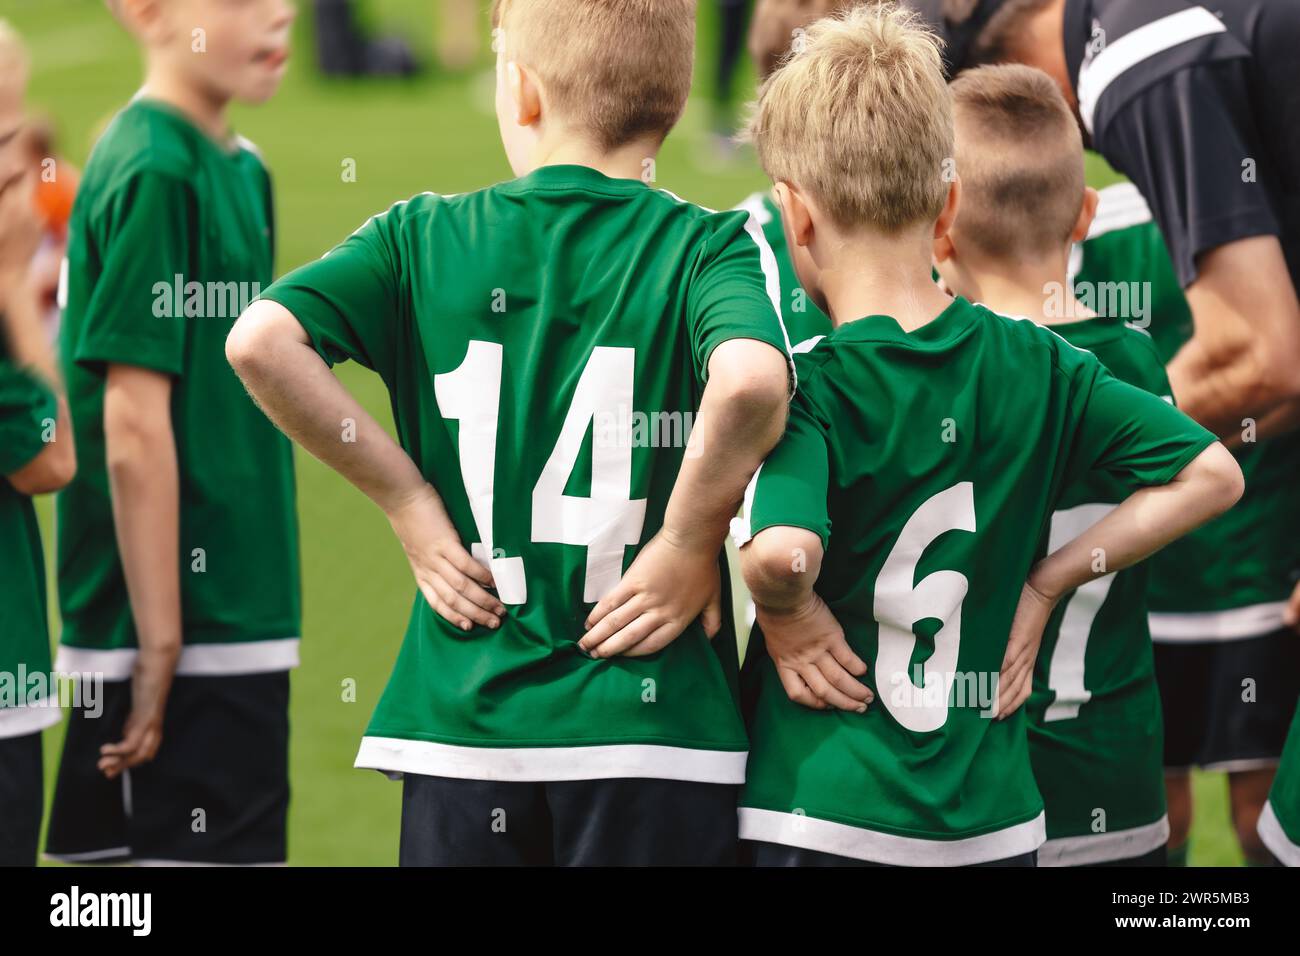 Children in sports team coached by young coach. a Soccer competition game for school kids. Kids listen to the coach's advice during the half-time brea Stock Photo